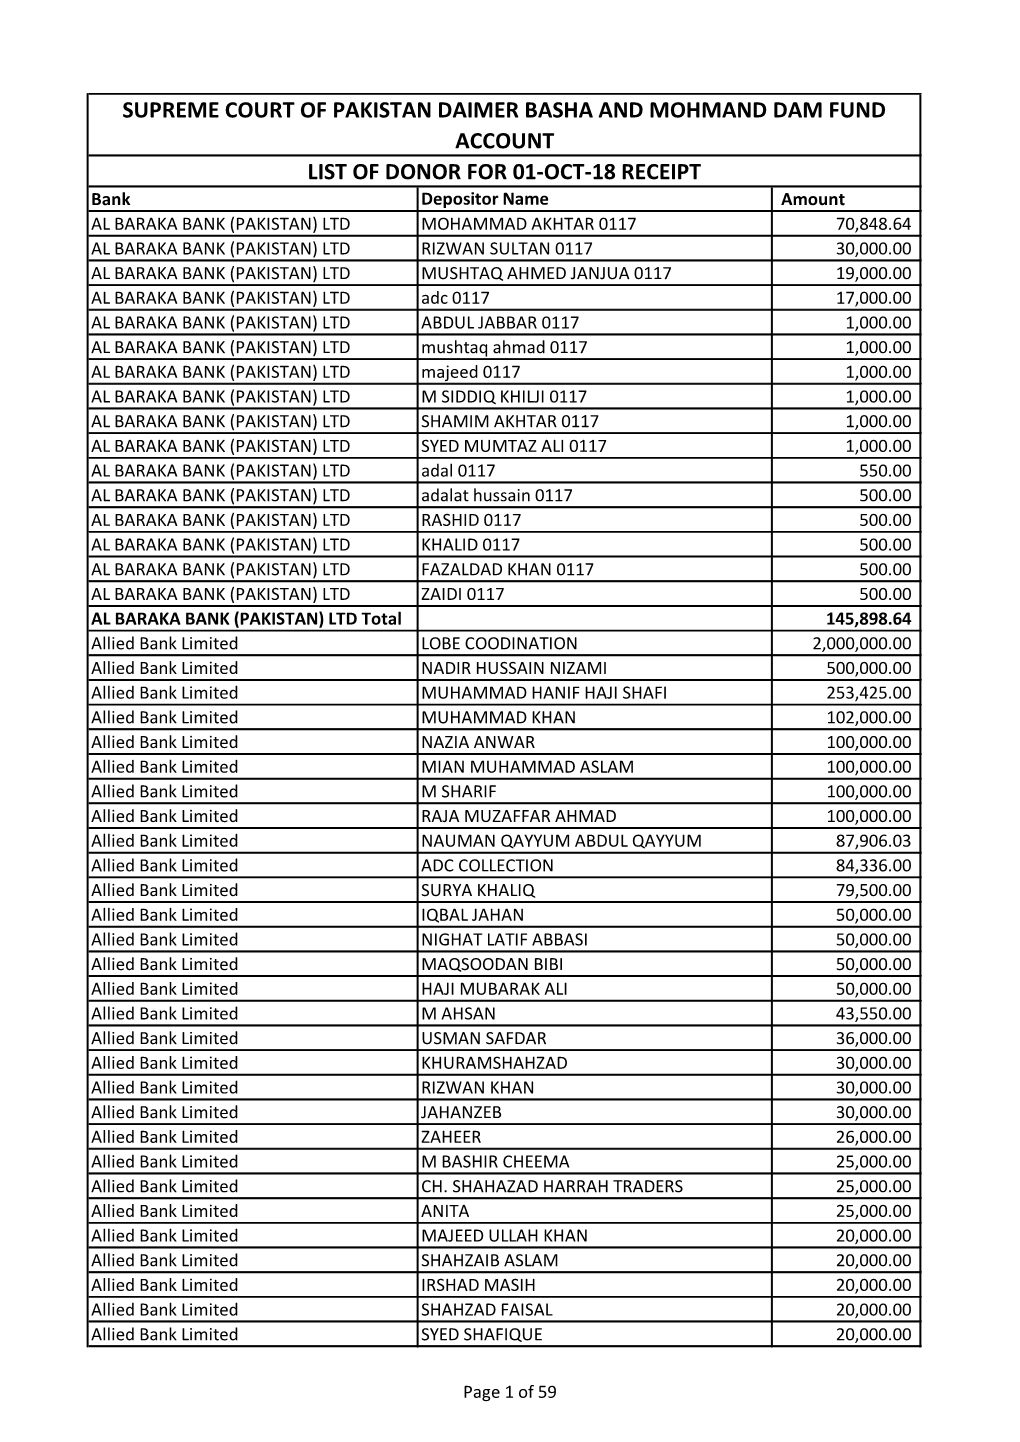 Supreme Court of Pakistan Daimer Basha and Mohmand Dam Fund Account List of Donor for 01-Oct-18 Receipt